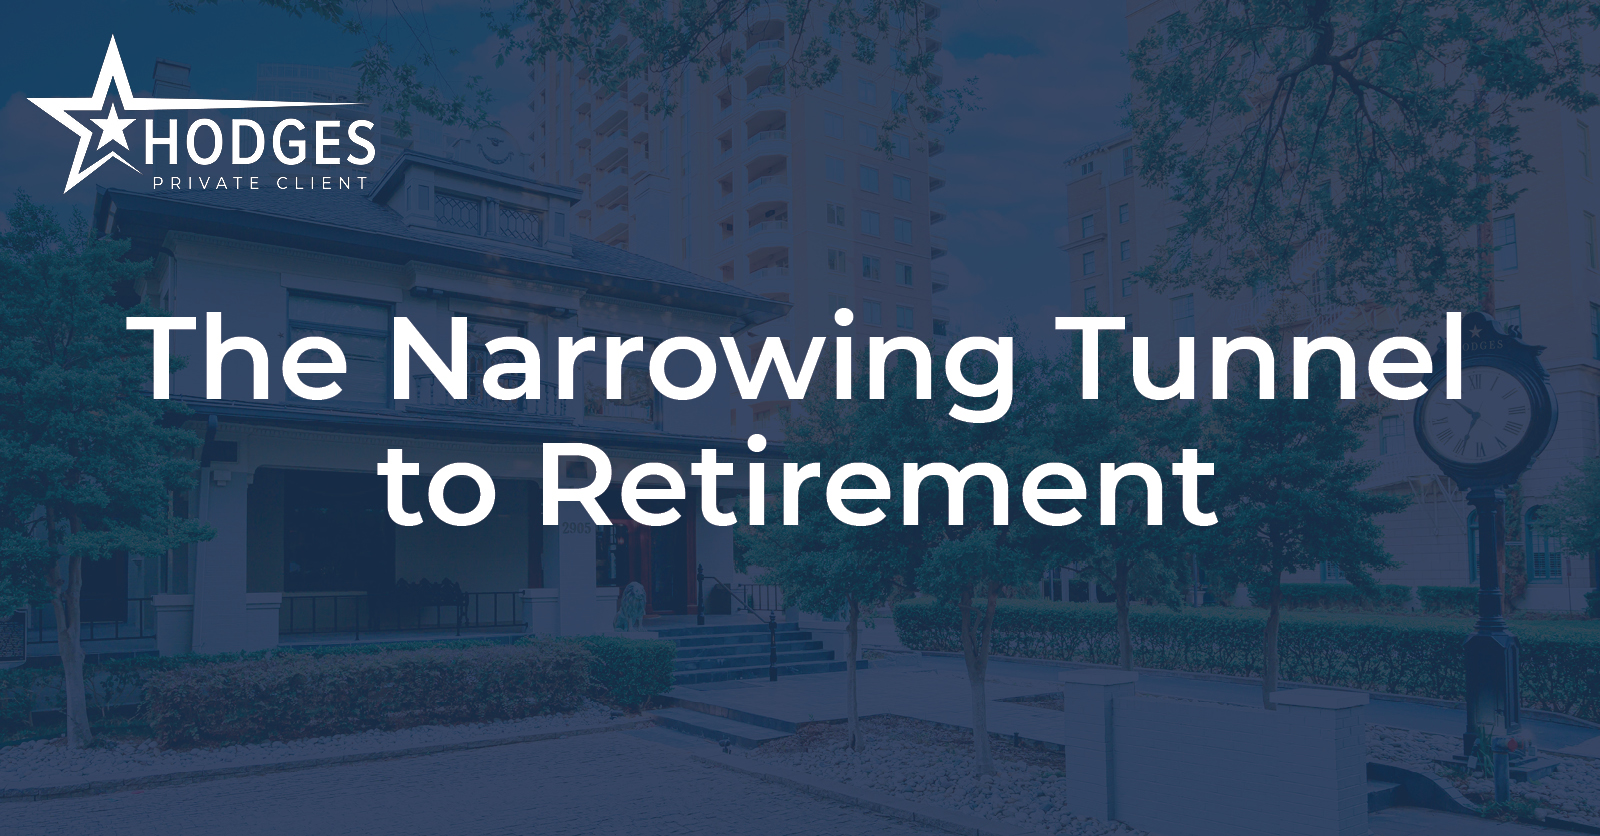 The Narrowing Tunnel to Retirement